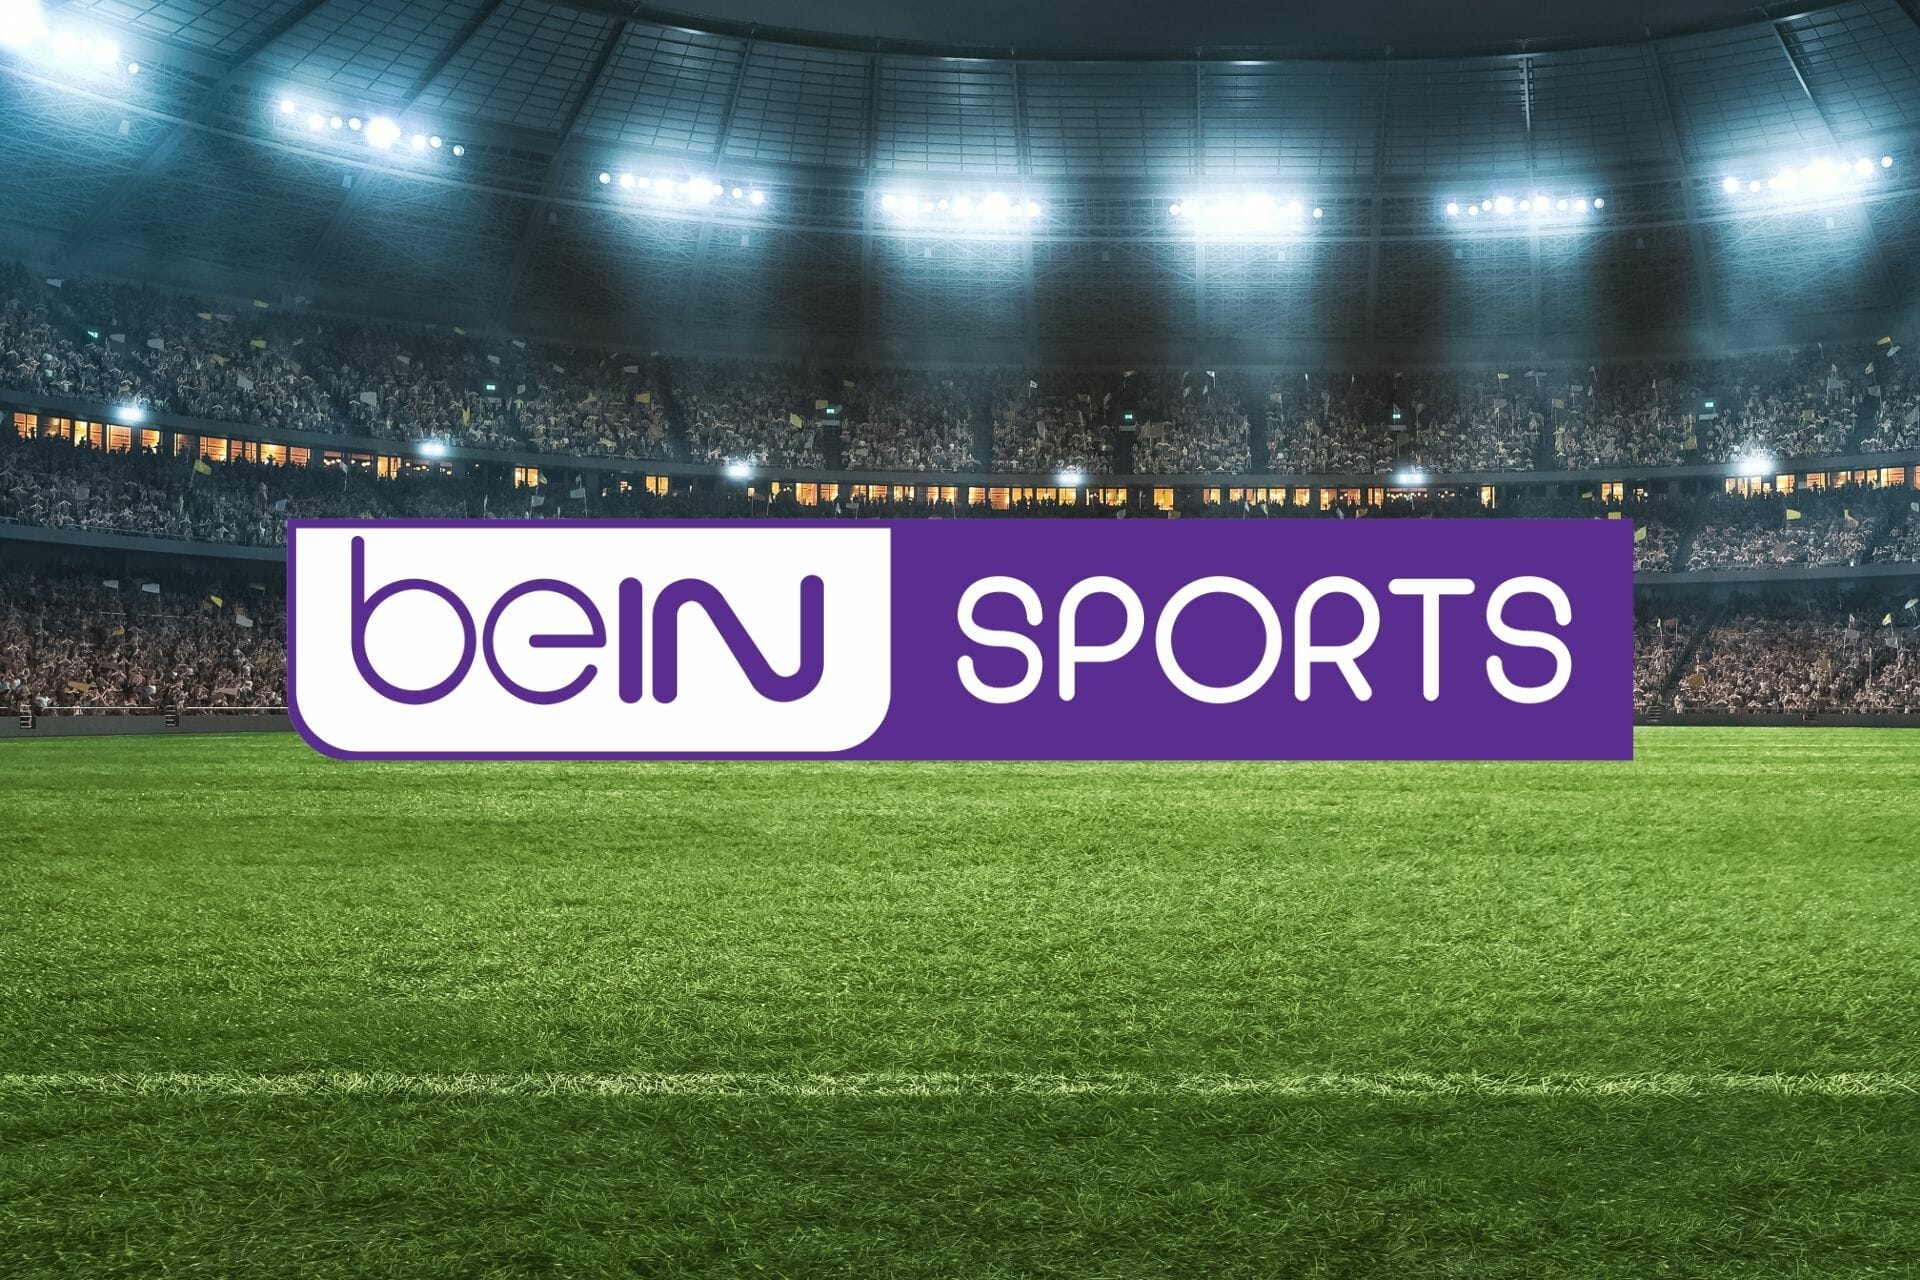 watch bein sports live free nbsp;'My grandparents fled antisemitism an...